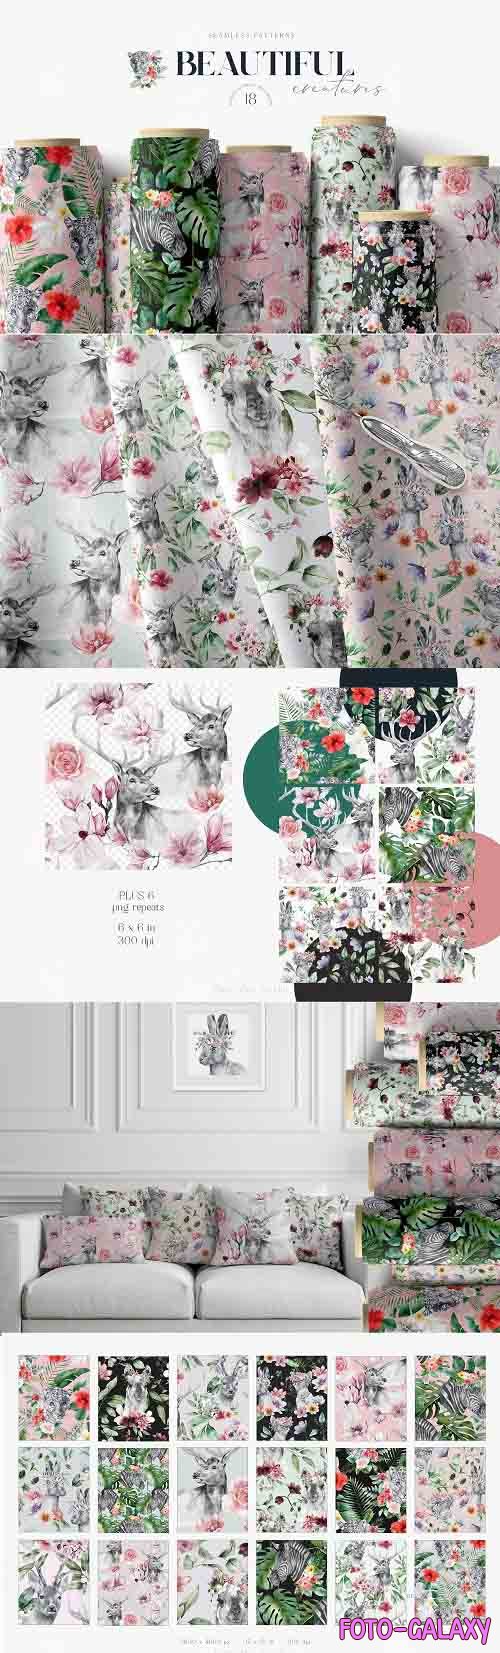 Animals and Flowers Seamless Patterns | Summer Patterns - 1373134